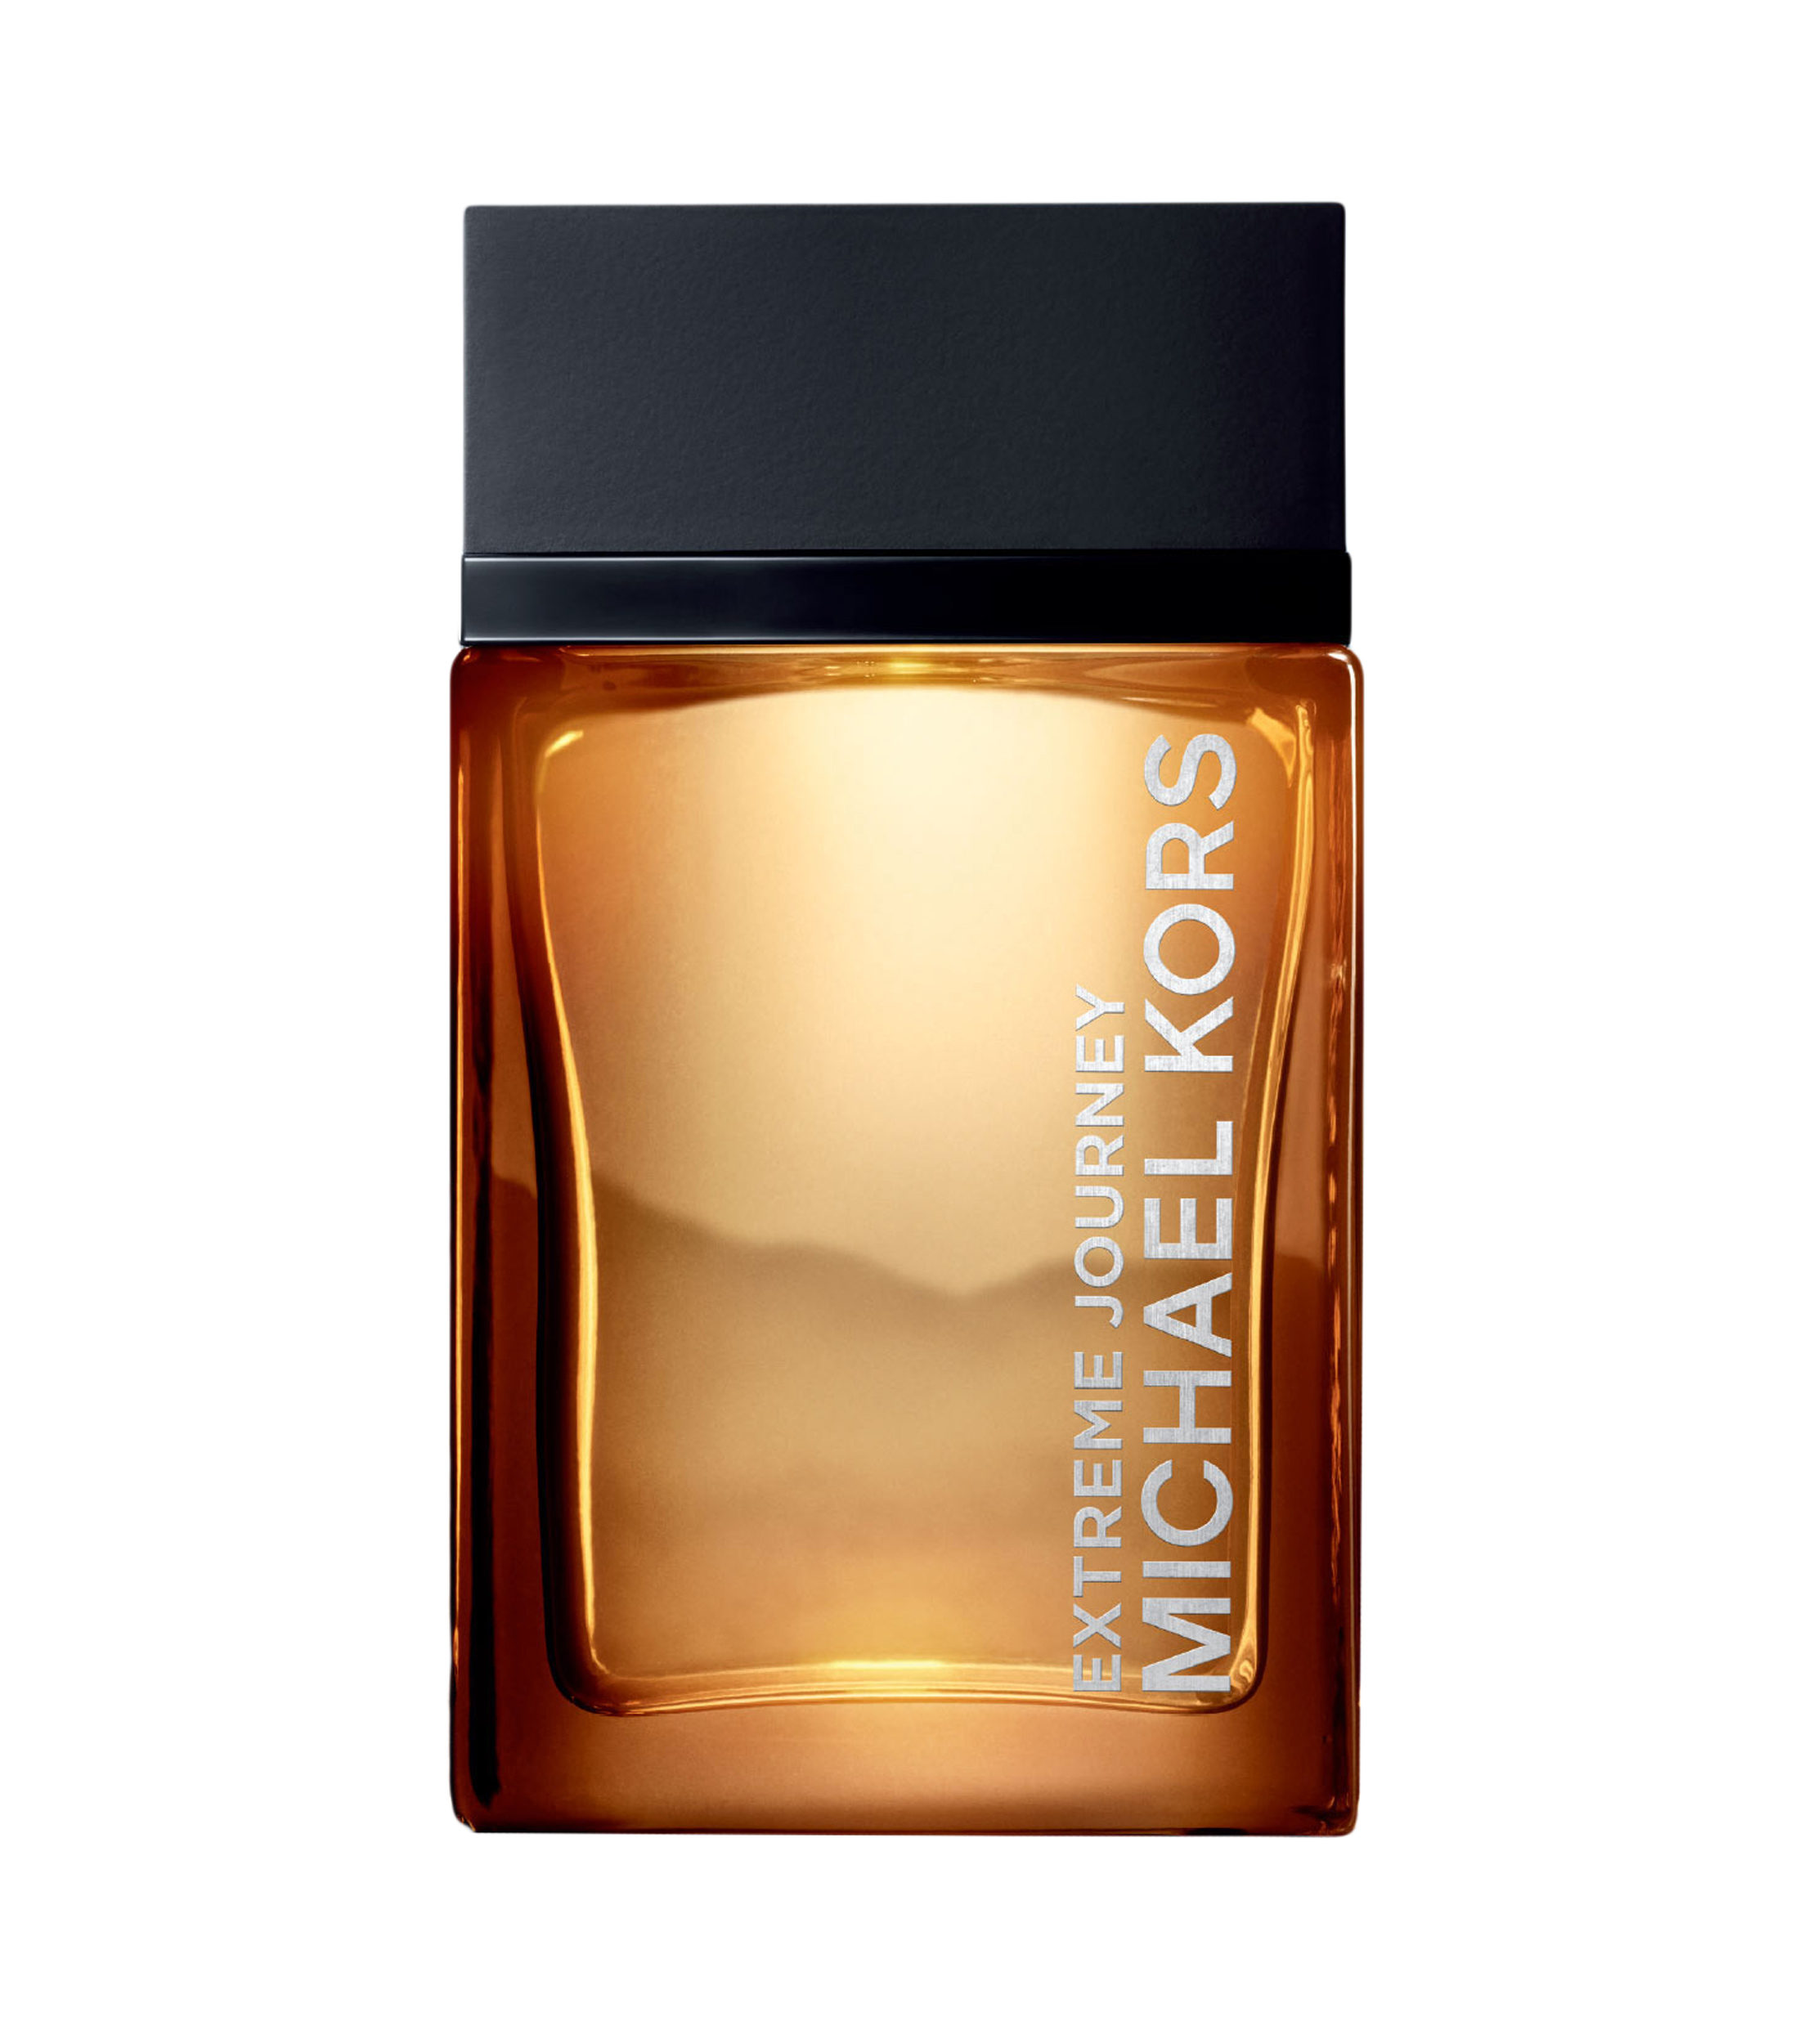 extreme journey michael kors review